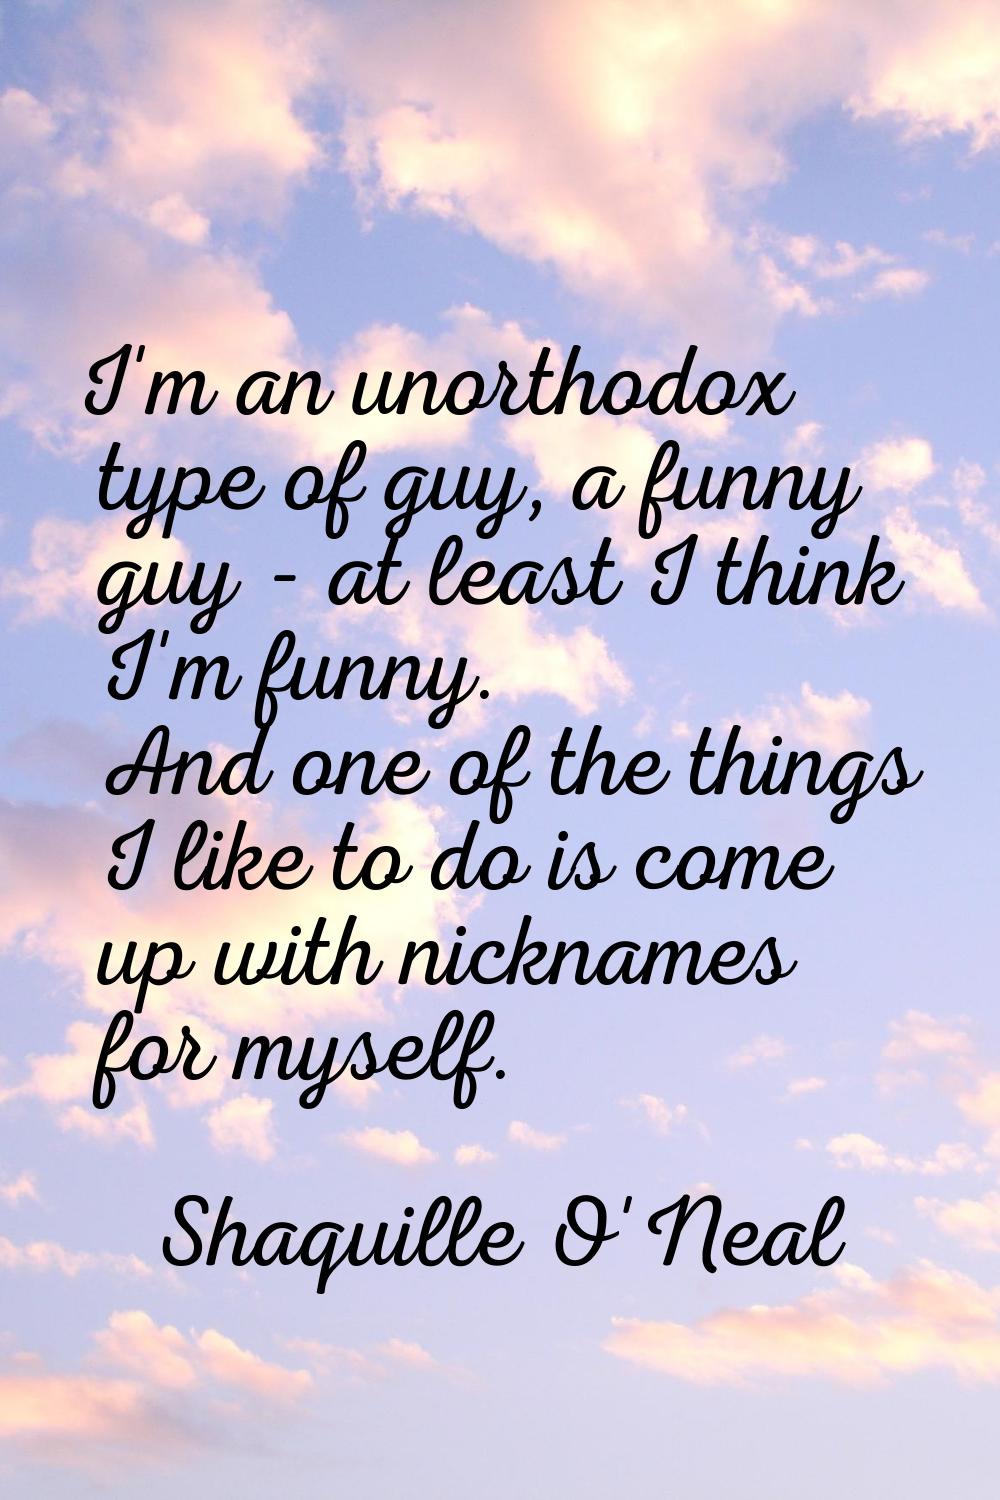 I'm an unorthodox type of guy, a funny guy - at least I think I'm funny. And one of the things I li